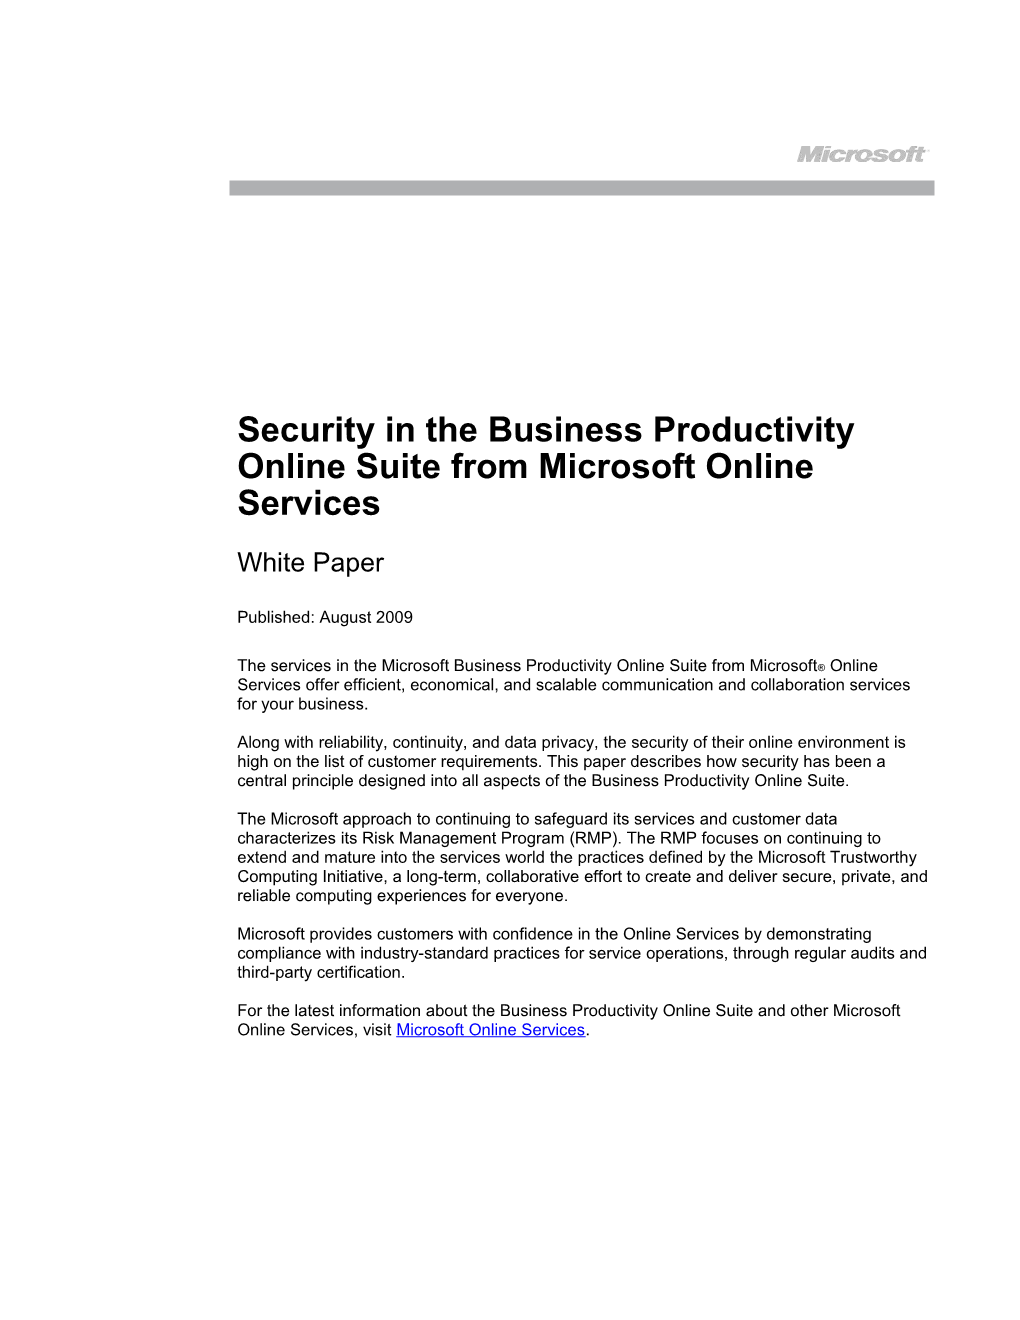 Security in the Business Productivity Online Suite from Microsoft Online Services